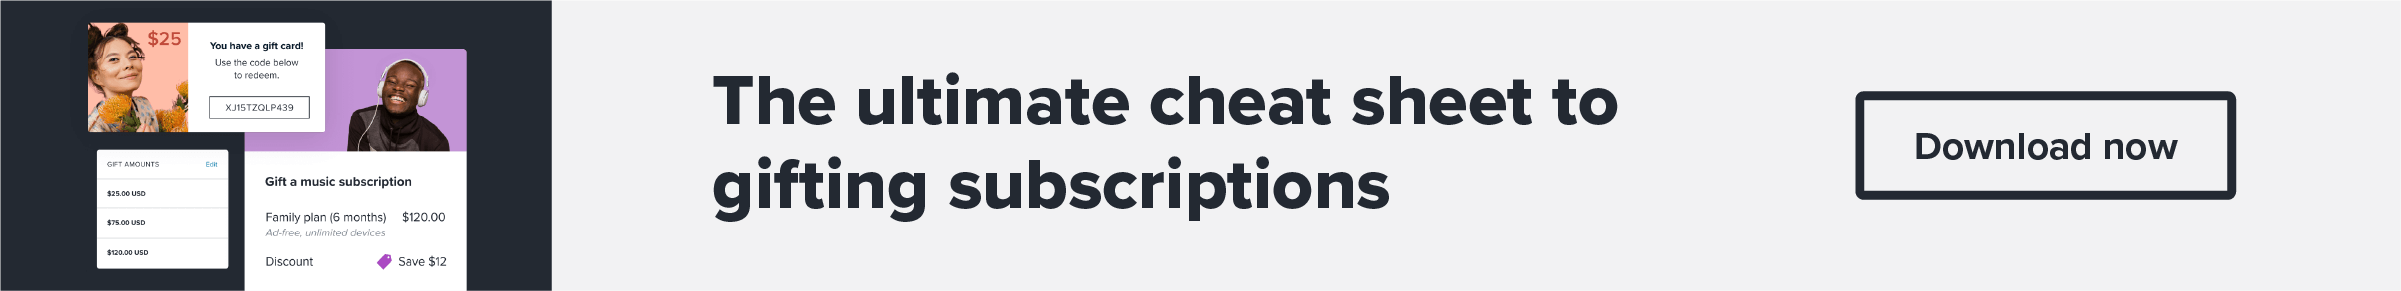 The ultimate cheat sheet to gifting subscriptions CTA image